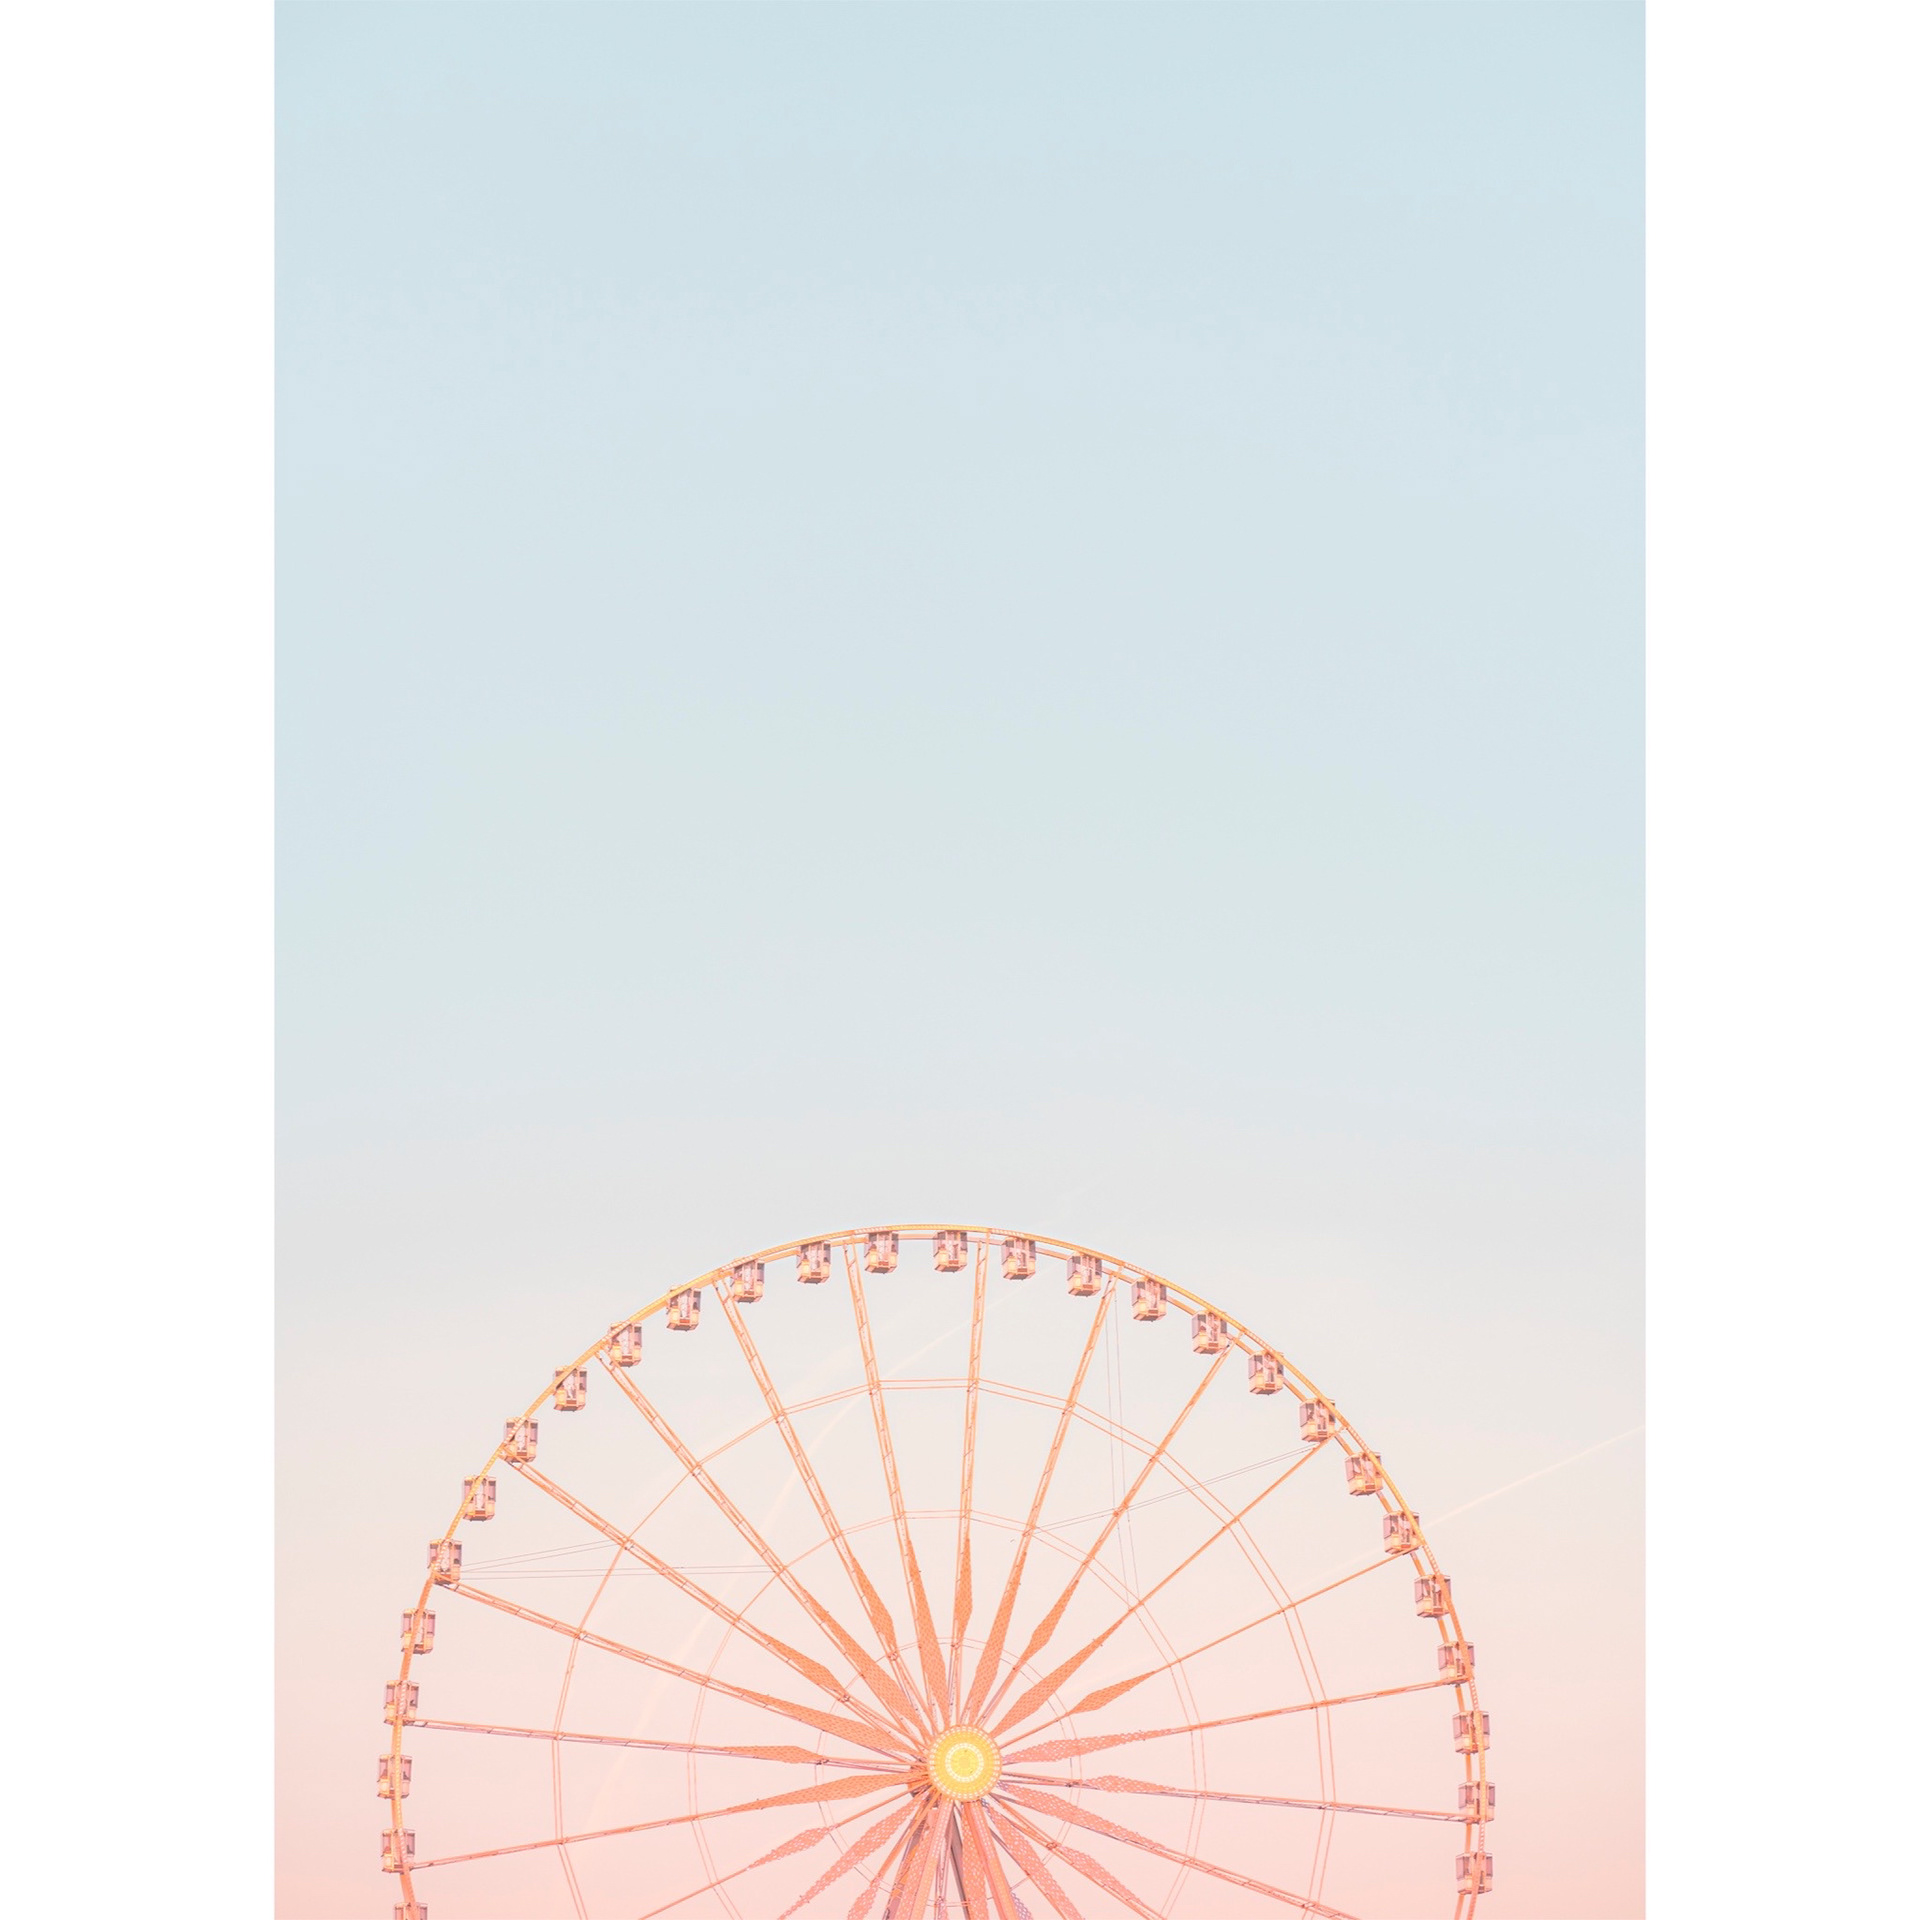 Minimalistic Ferris Wheel in the Tuileries Gardens on a blurred pastel sky at sunset. Pink to blue gradient of colors. Paris, France